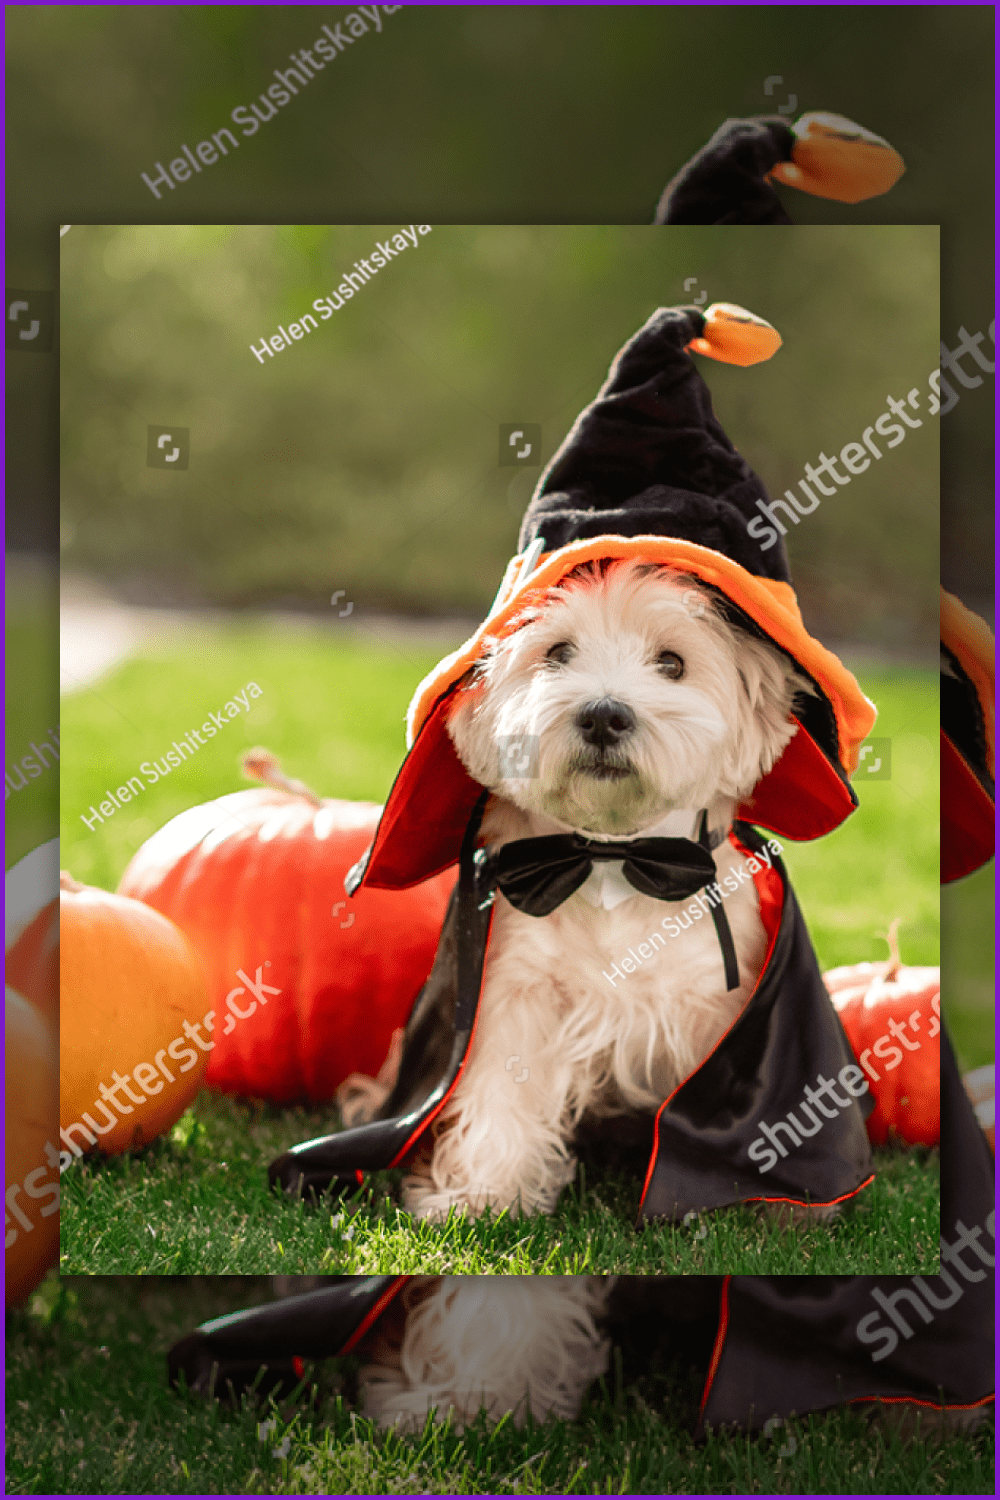 Dog dressed as a sorcerer in a meadow with pumpkins.